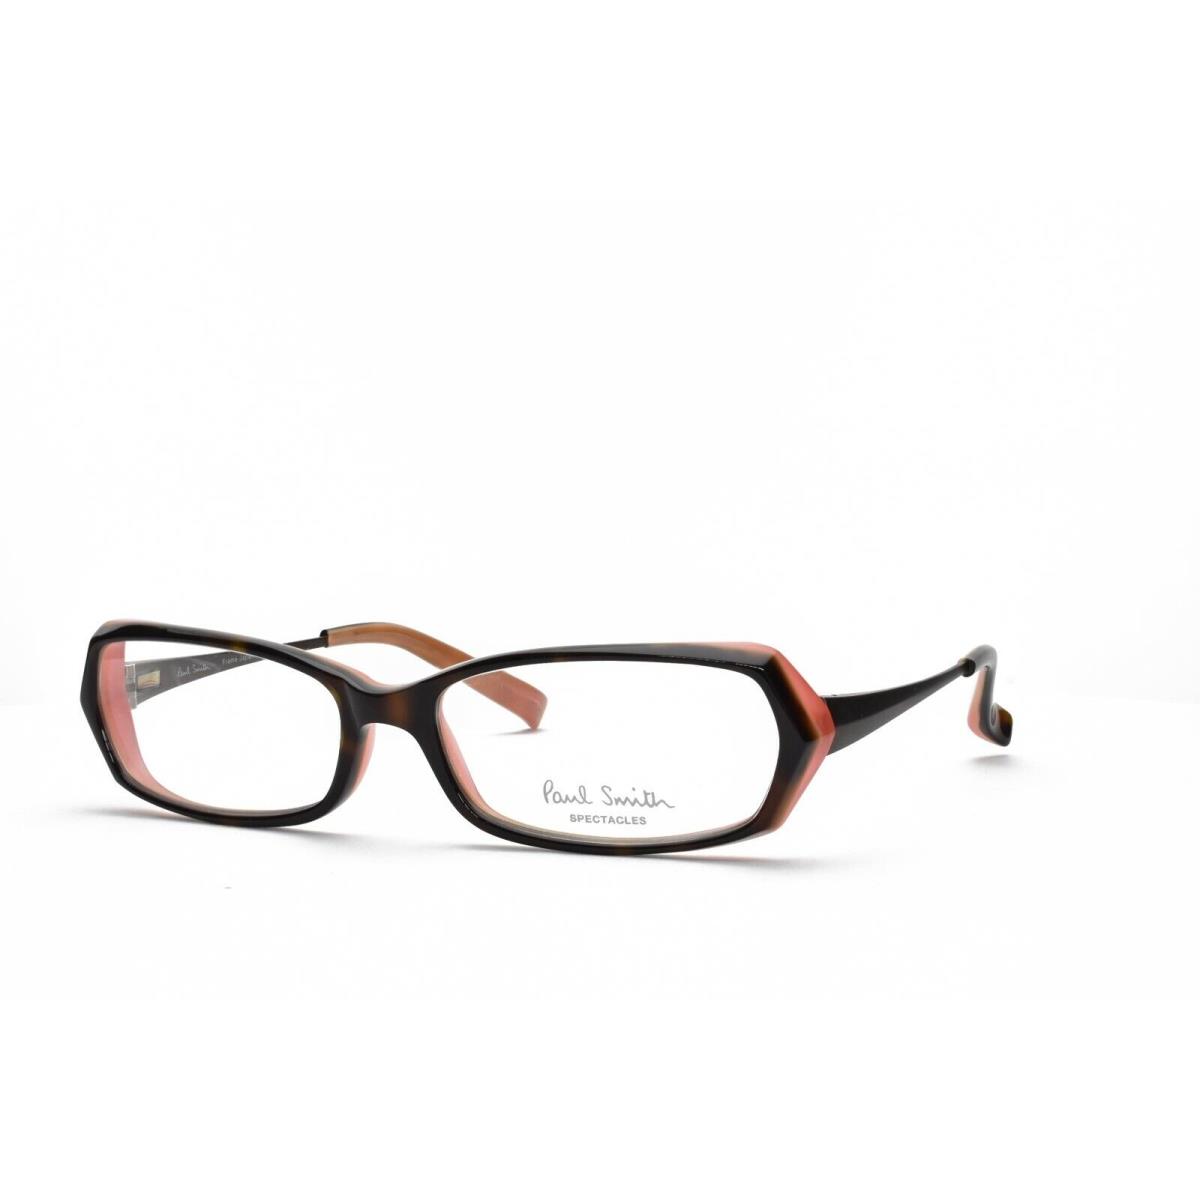 Paul Smith PS 404 Oabl Eyeglasses Frames Only 54-16-135